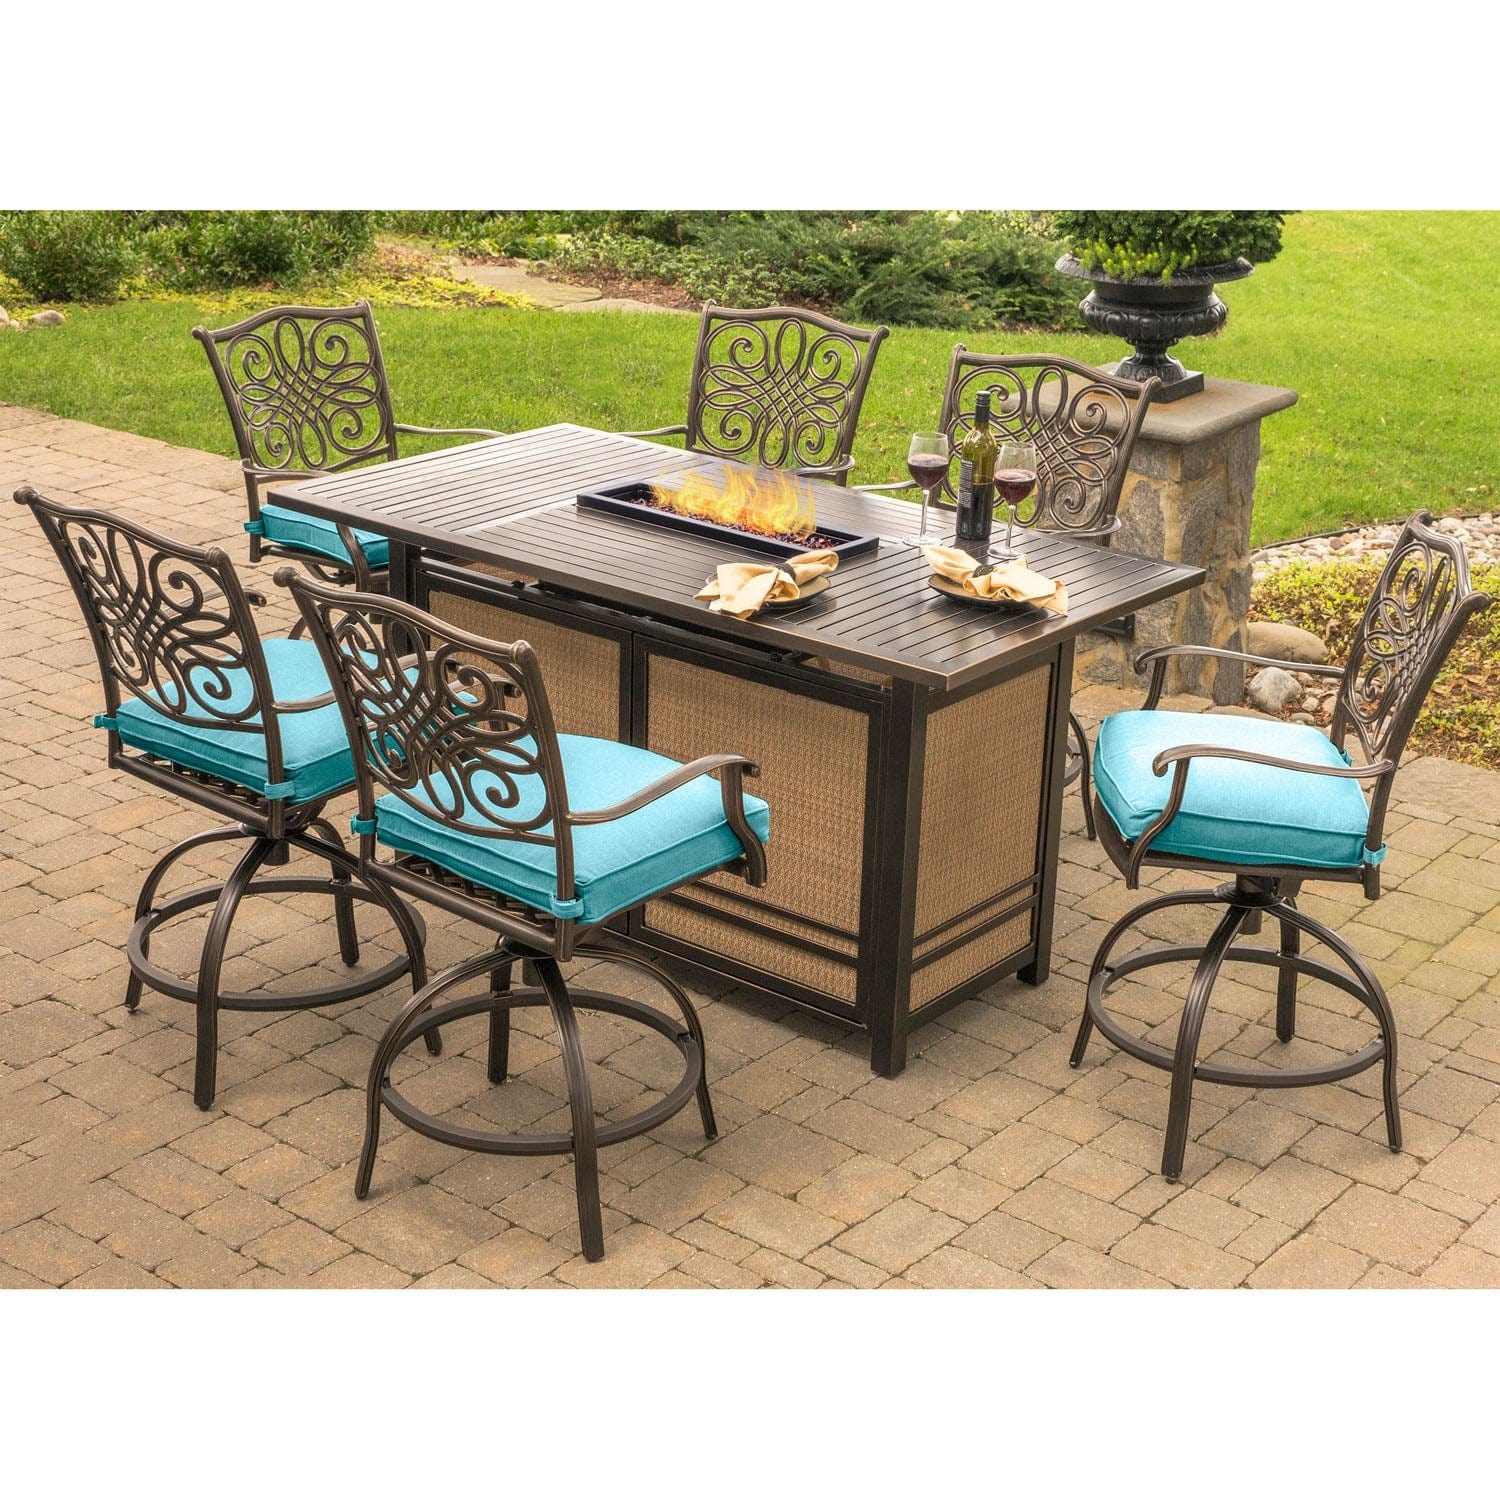 Hanover Fire Pit Dining Set Hanover - Traditions 7-Piece Aluminium Frame High-Dining Set in Blue with 30,000 BTU Fire Pit Table | TRAD7PCFPBR-BLU